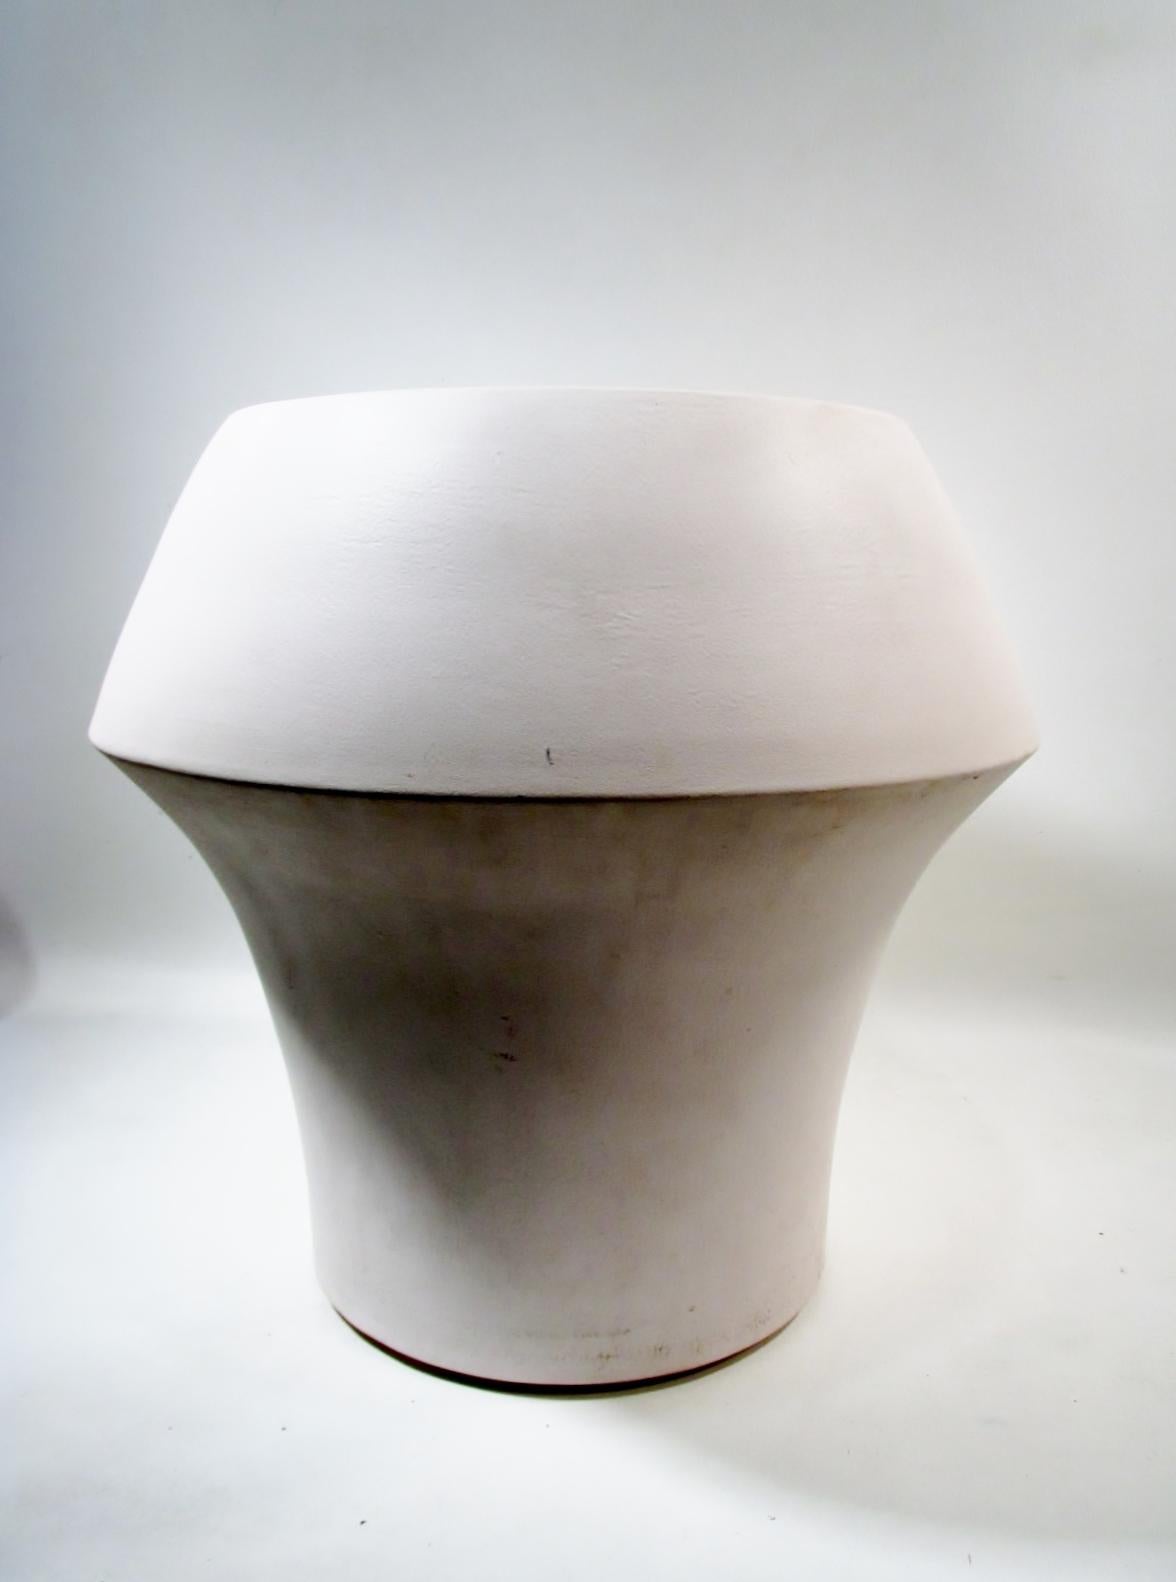 A scarce Marilyn Kay Austin designed for Architectural Pottery low planter. Approximate 14” tall and 15” diameter with a matte off white glaze finish and original protective cork ring to base.

Condition is very good to excellent overall showing a